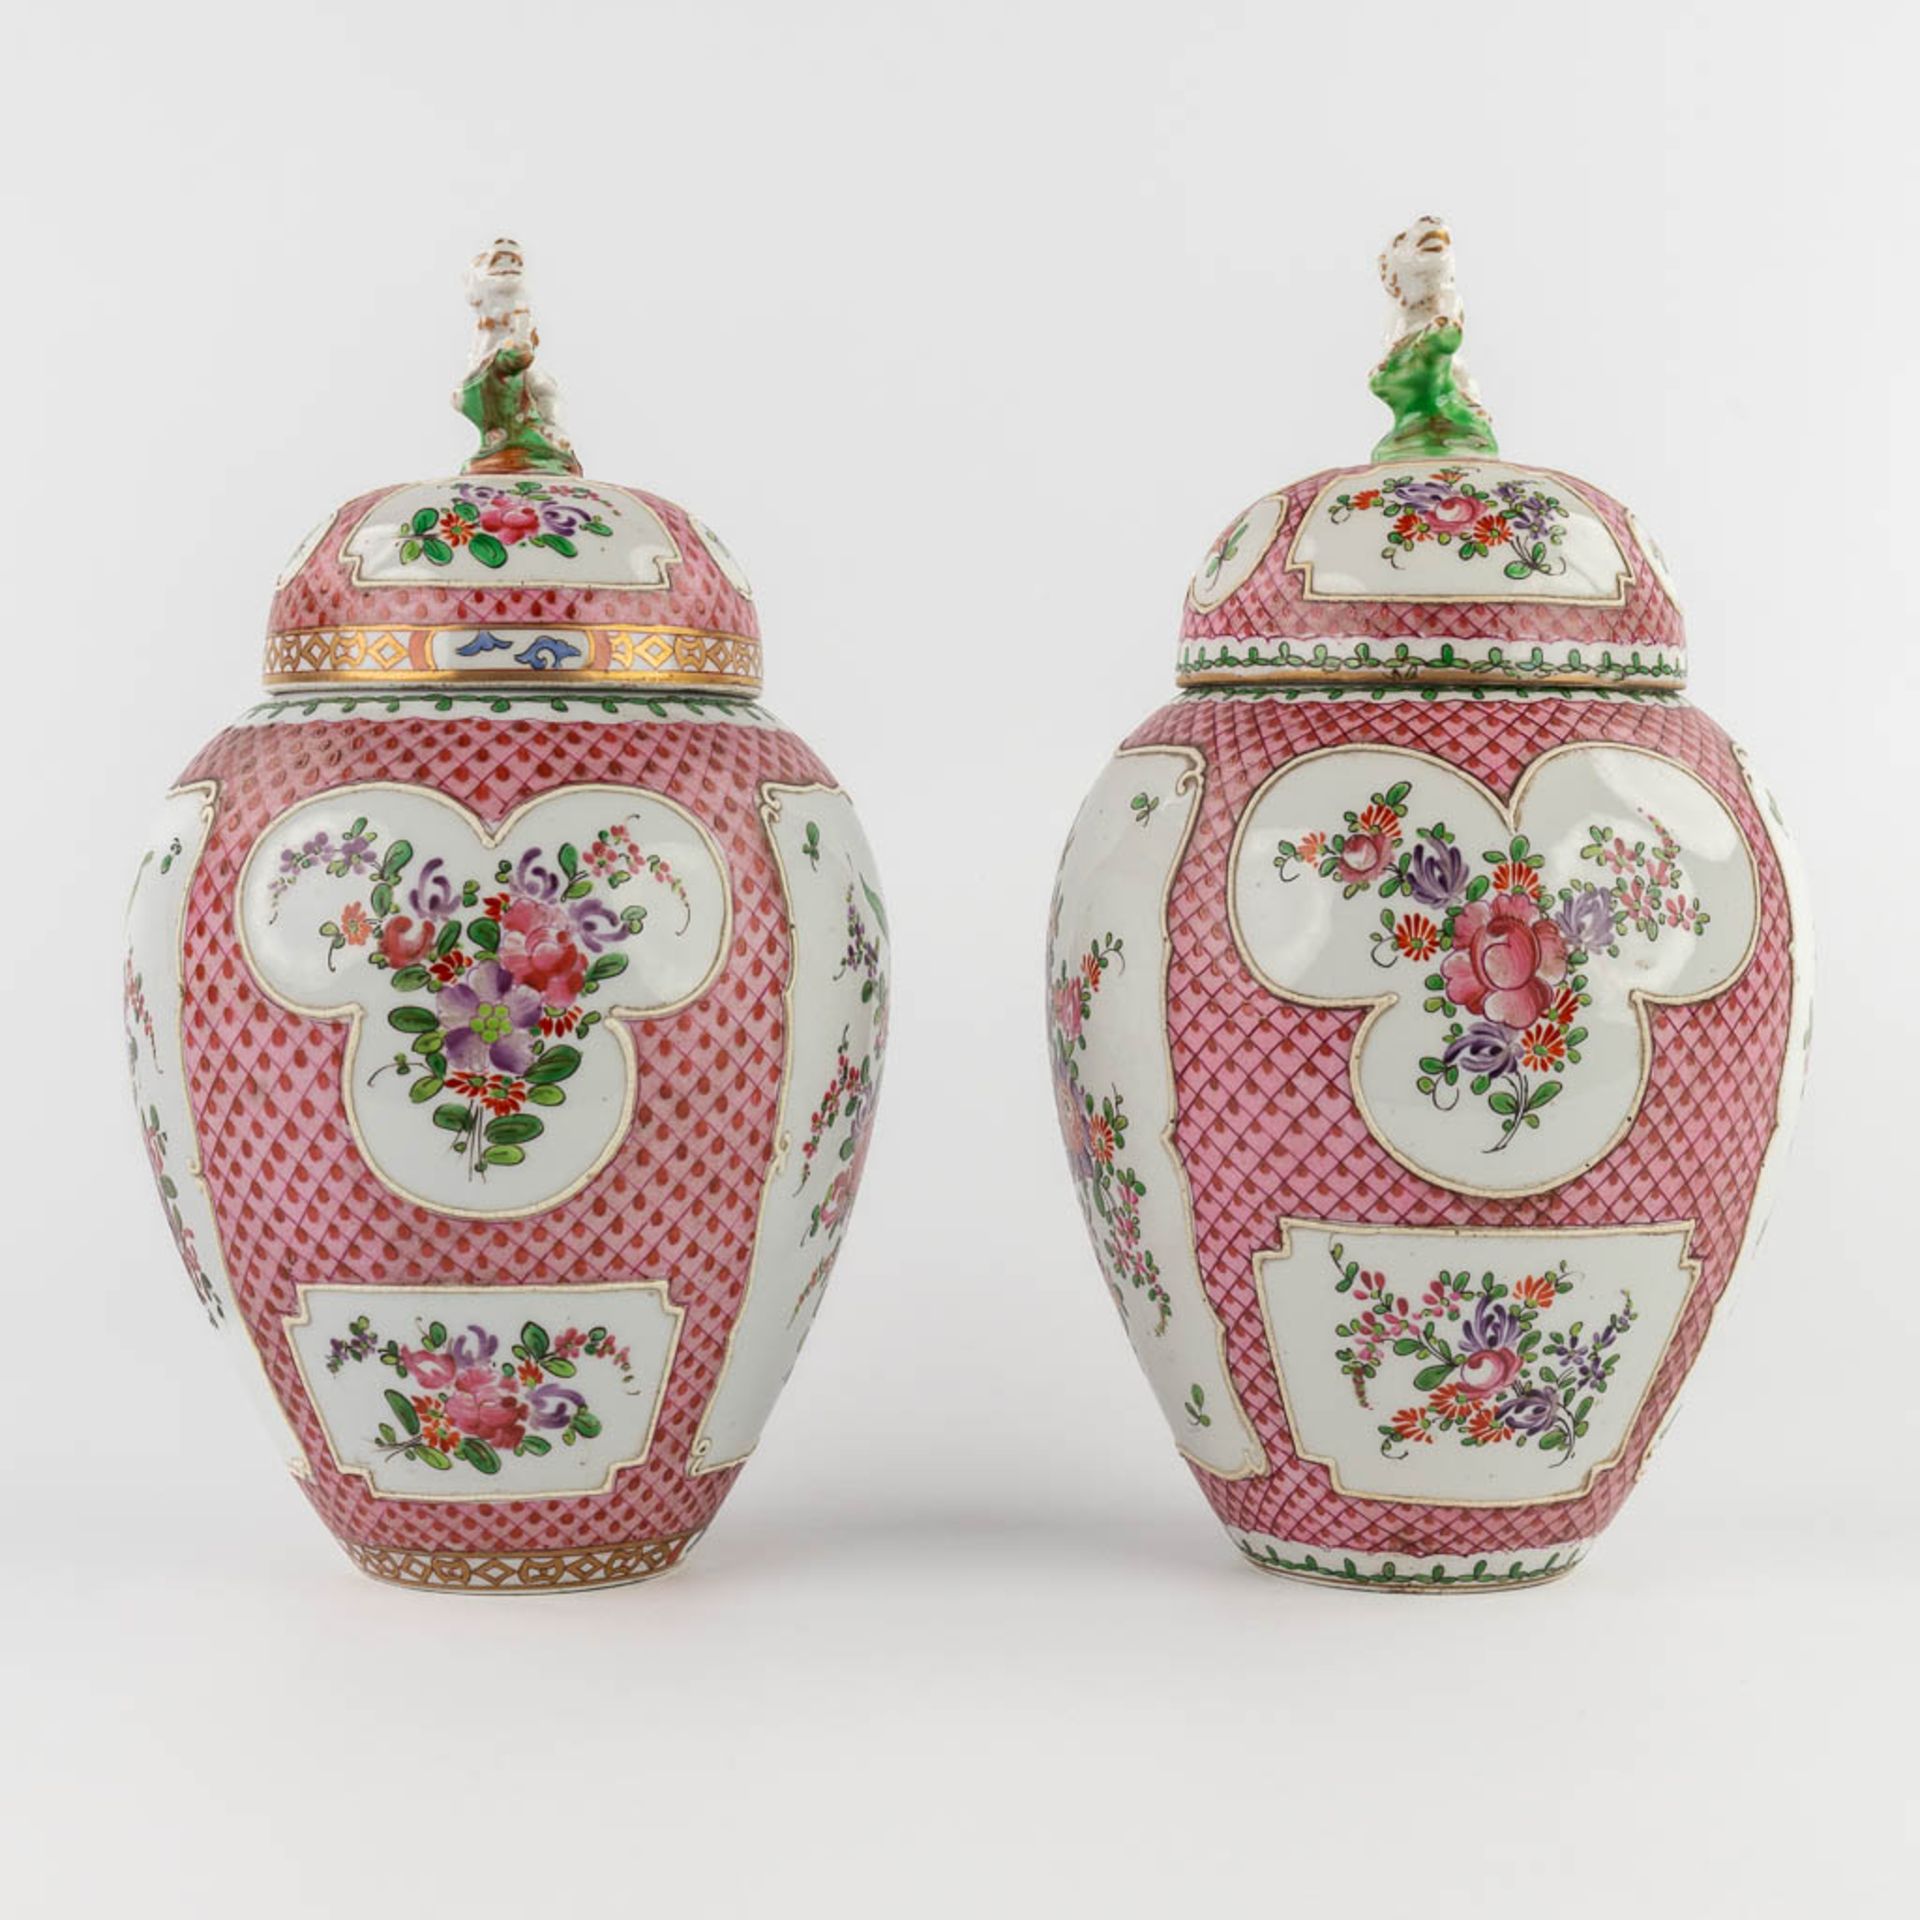 Samson, a pair of Oriental inspired vases with a hand-painted flower decor. (H:27 x D:15 cm) - Image 10 of 16